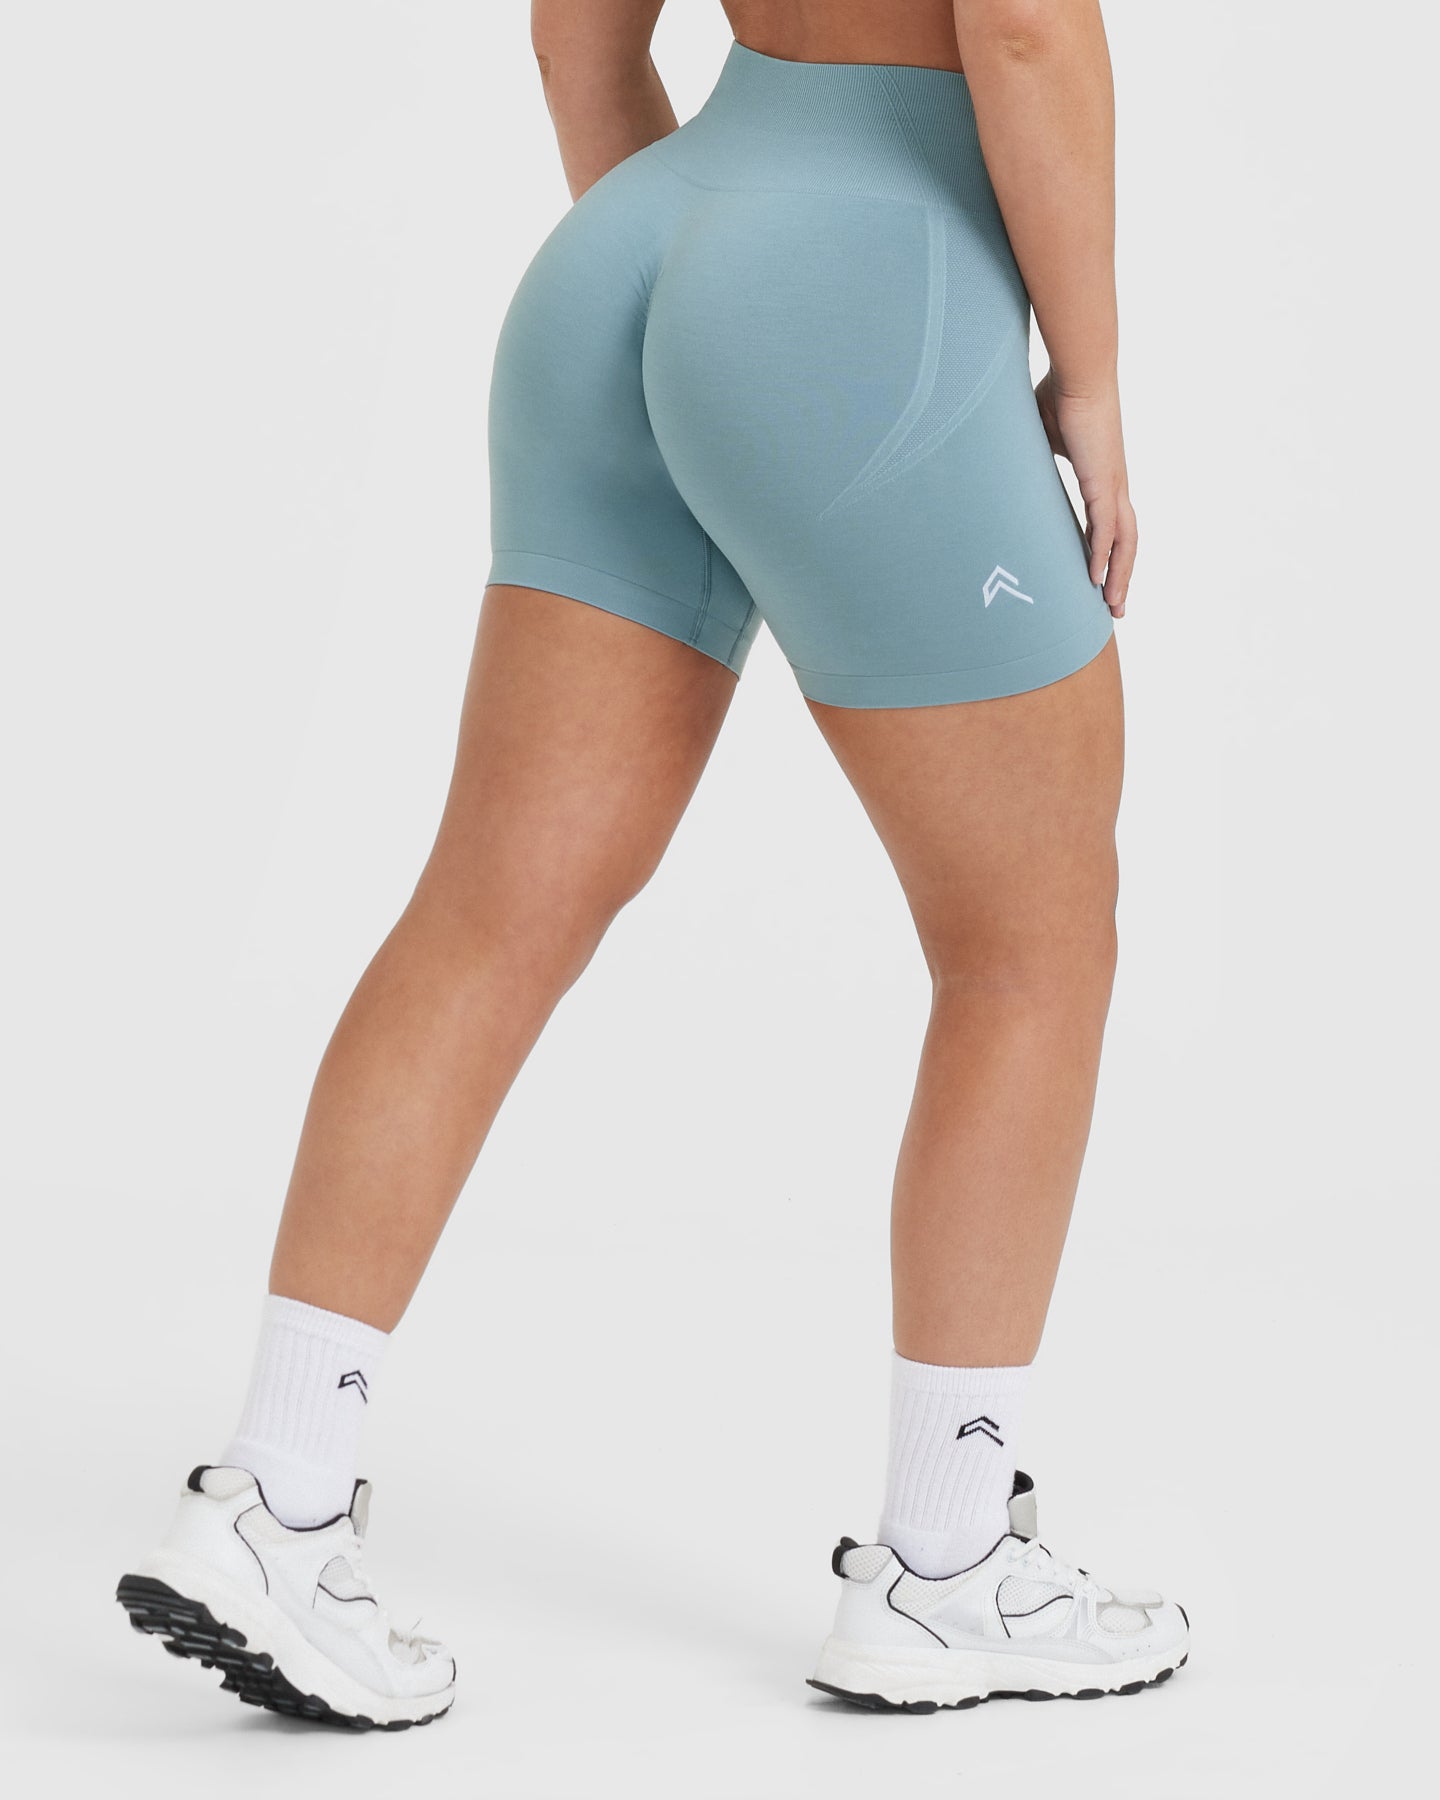 Women's Blue High Waisted Shorts - Steel Blue | Oner Active US